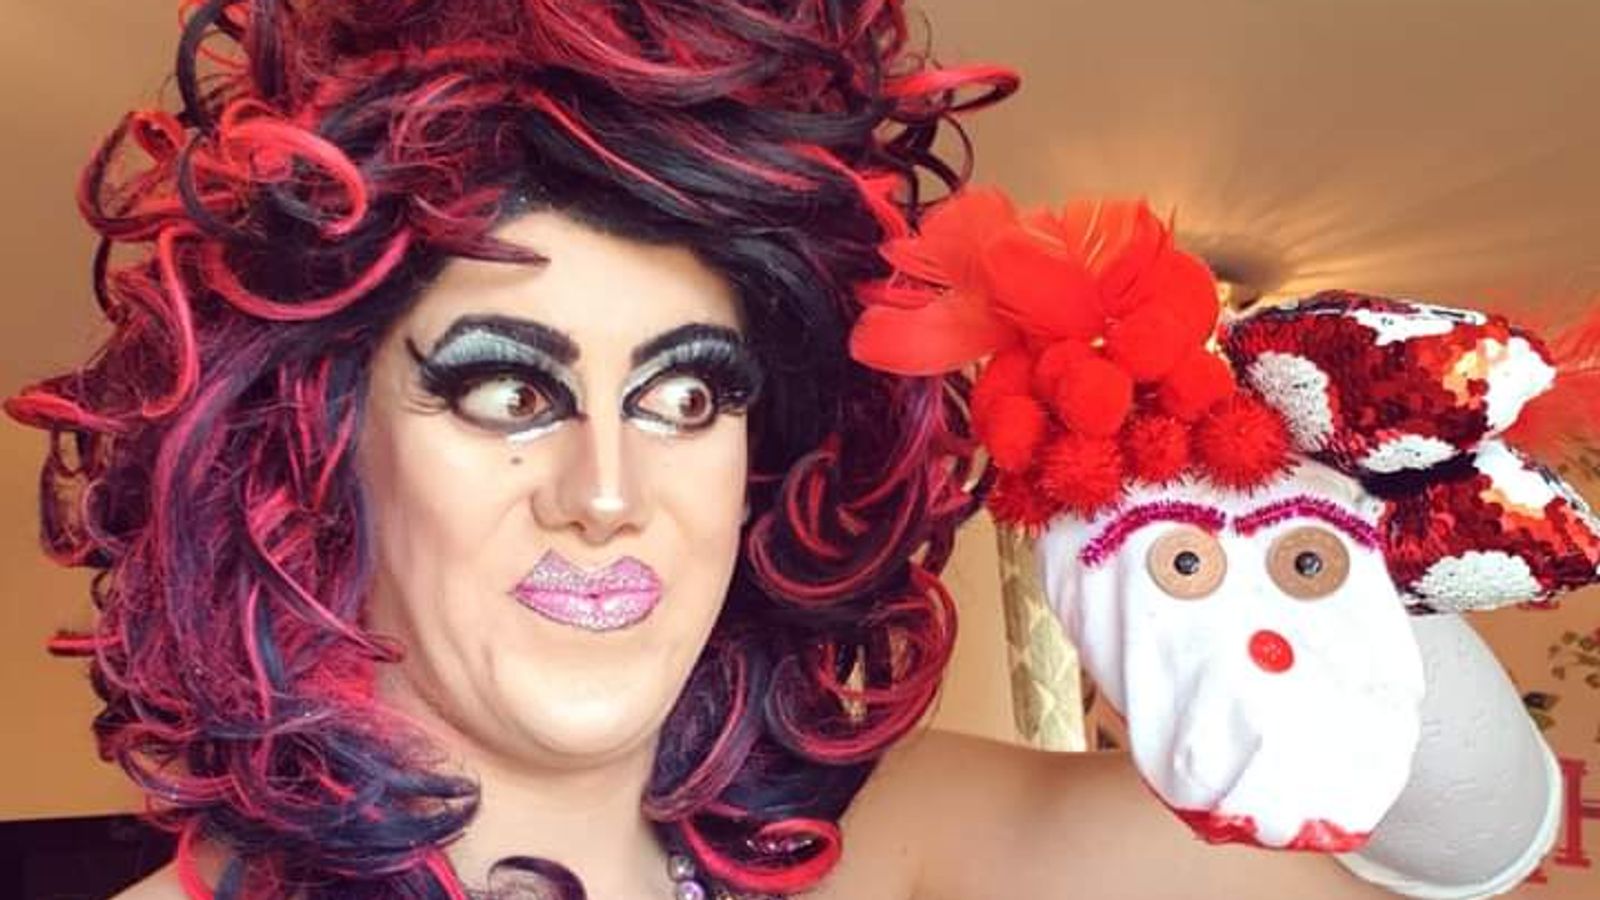 Drag queen at centre of Tate Britain protests hopes to be children's 'role model'